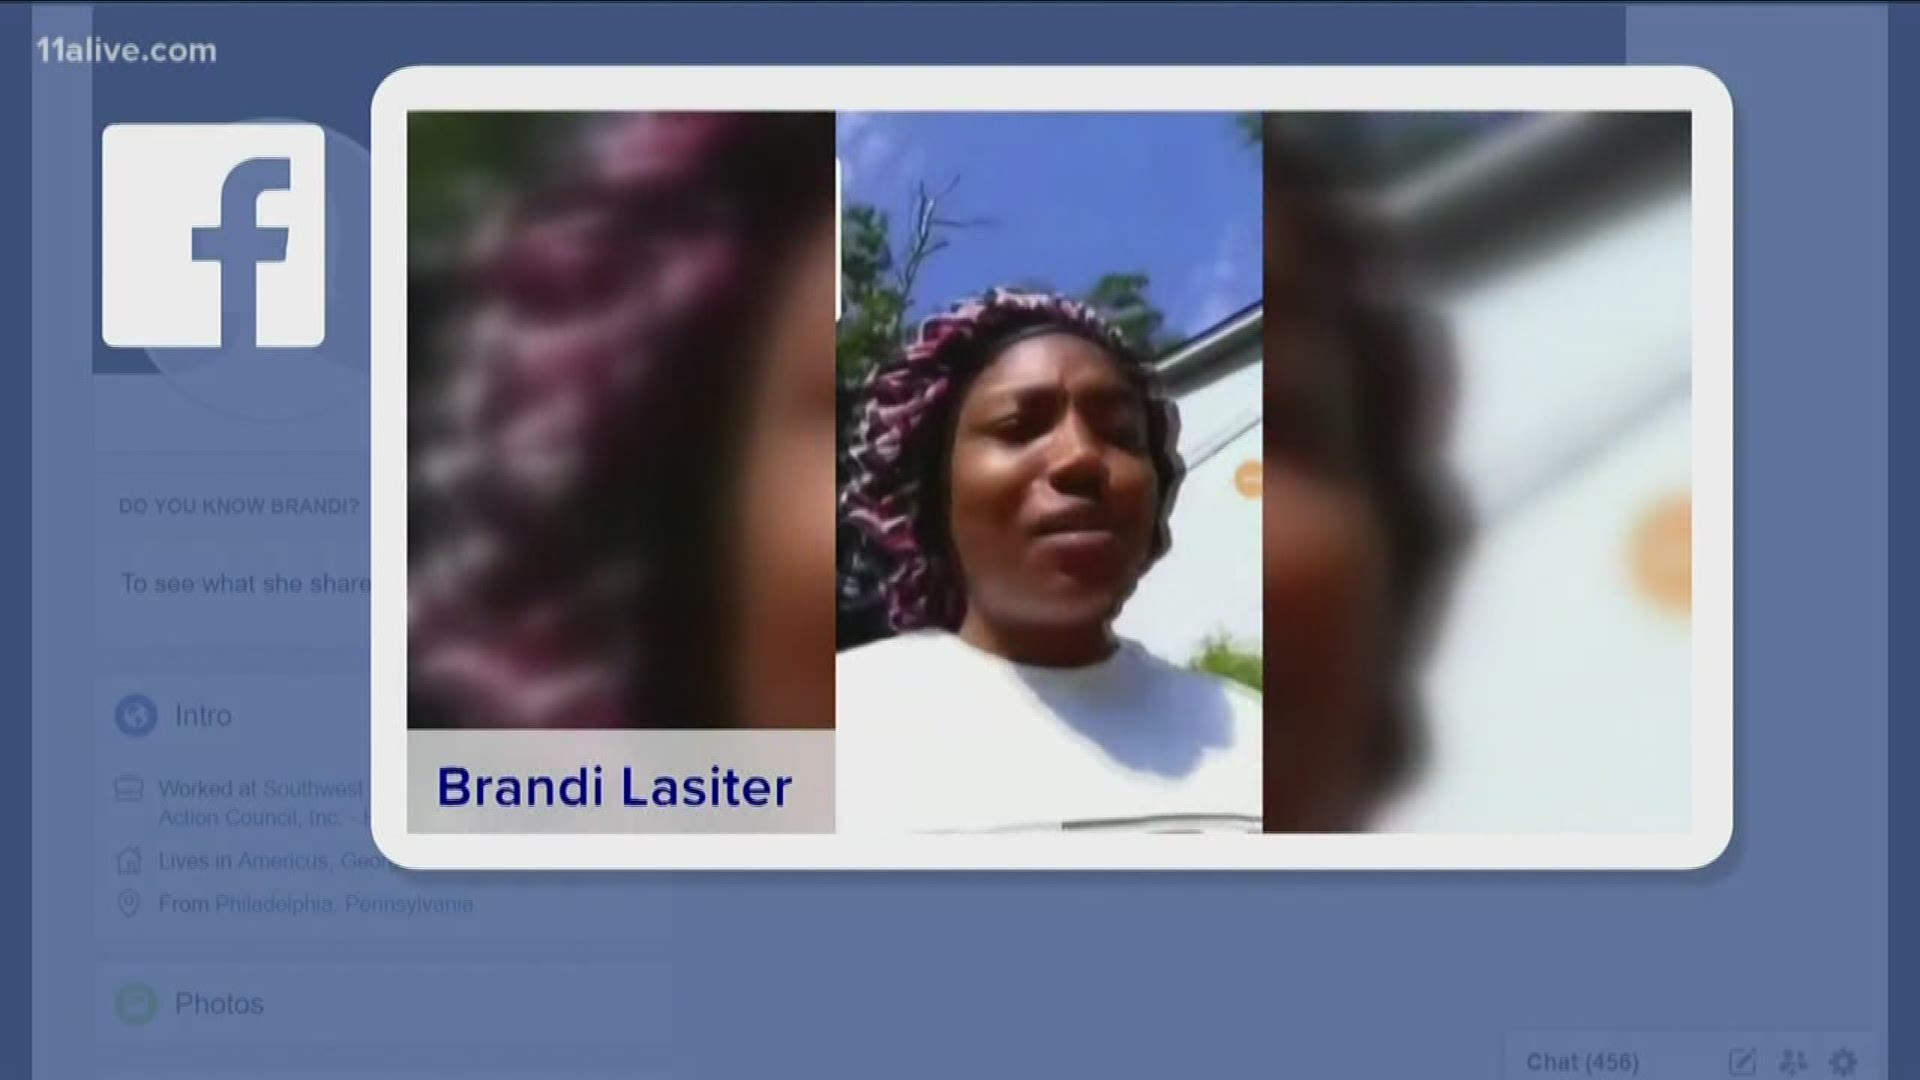 Brandi Yakeima Lasiter is being investigated by police over the incident.